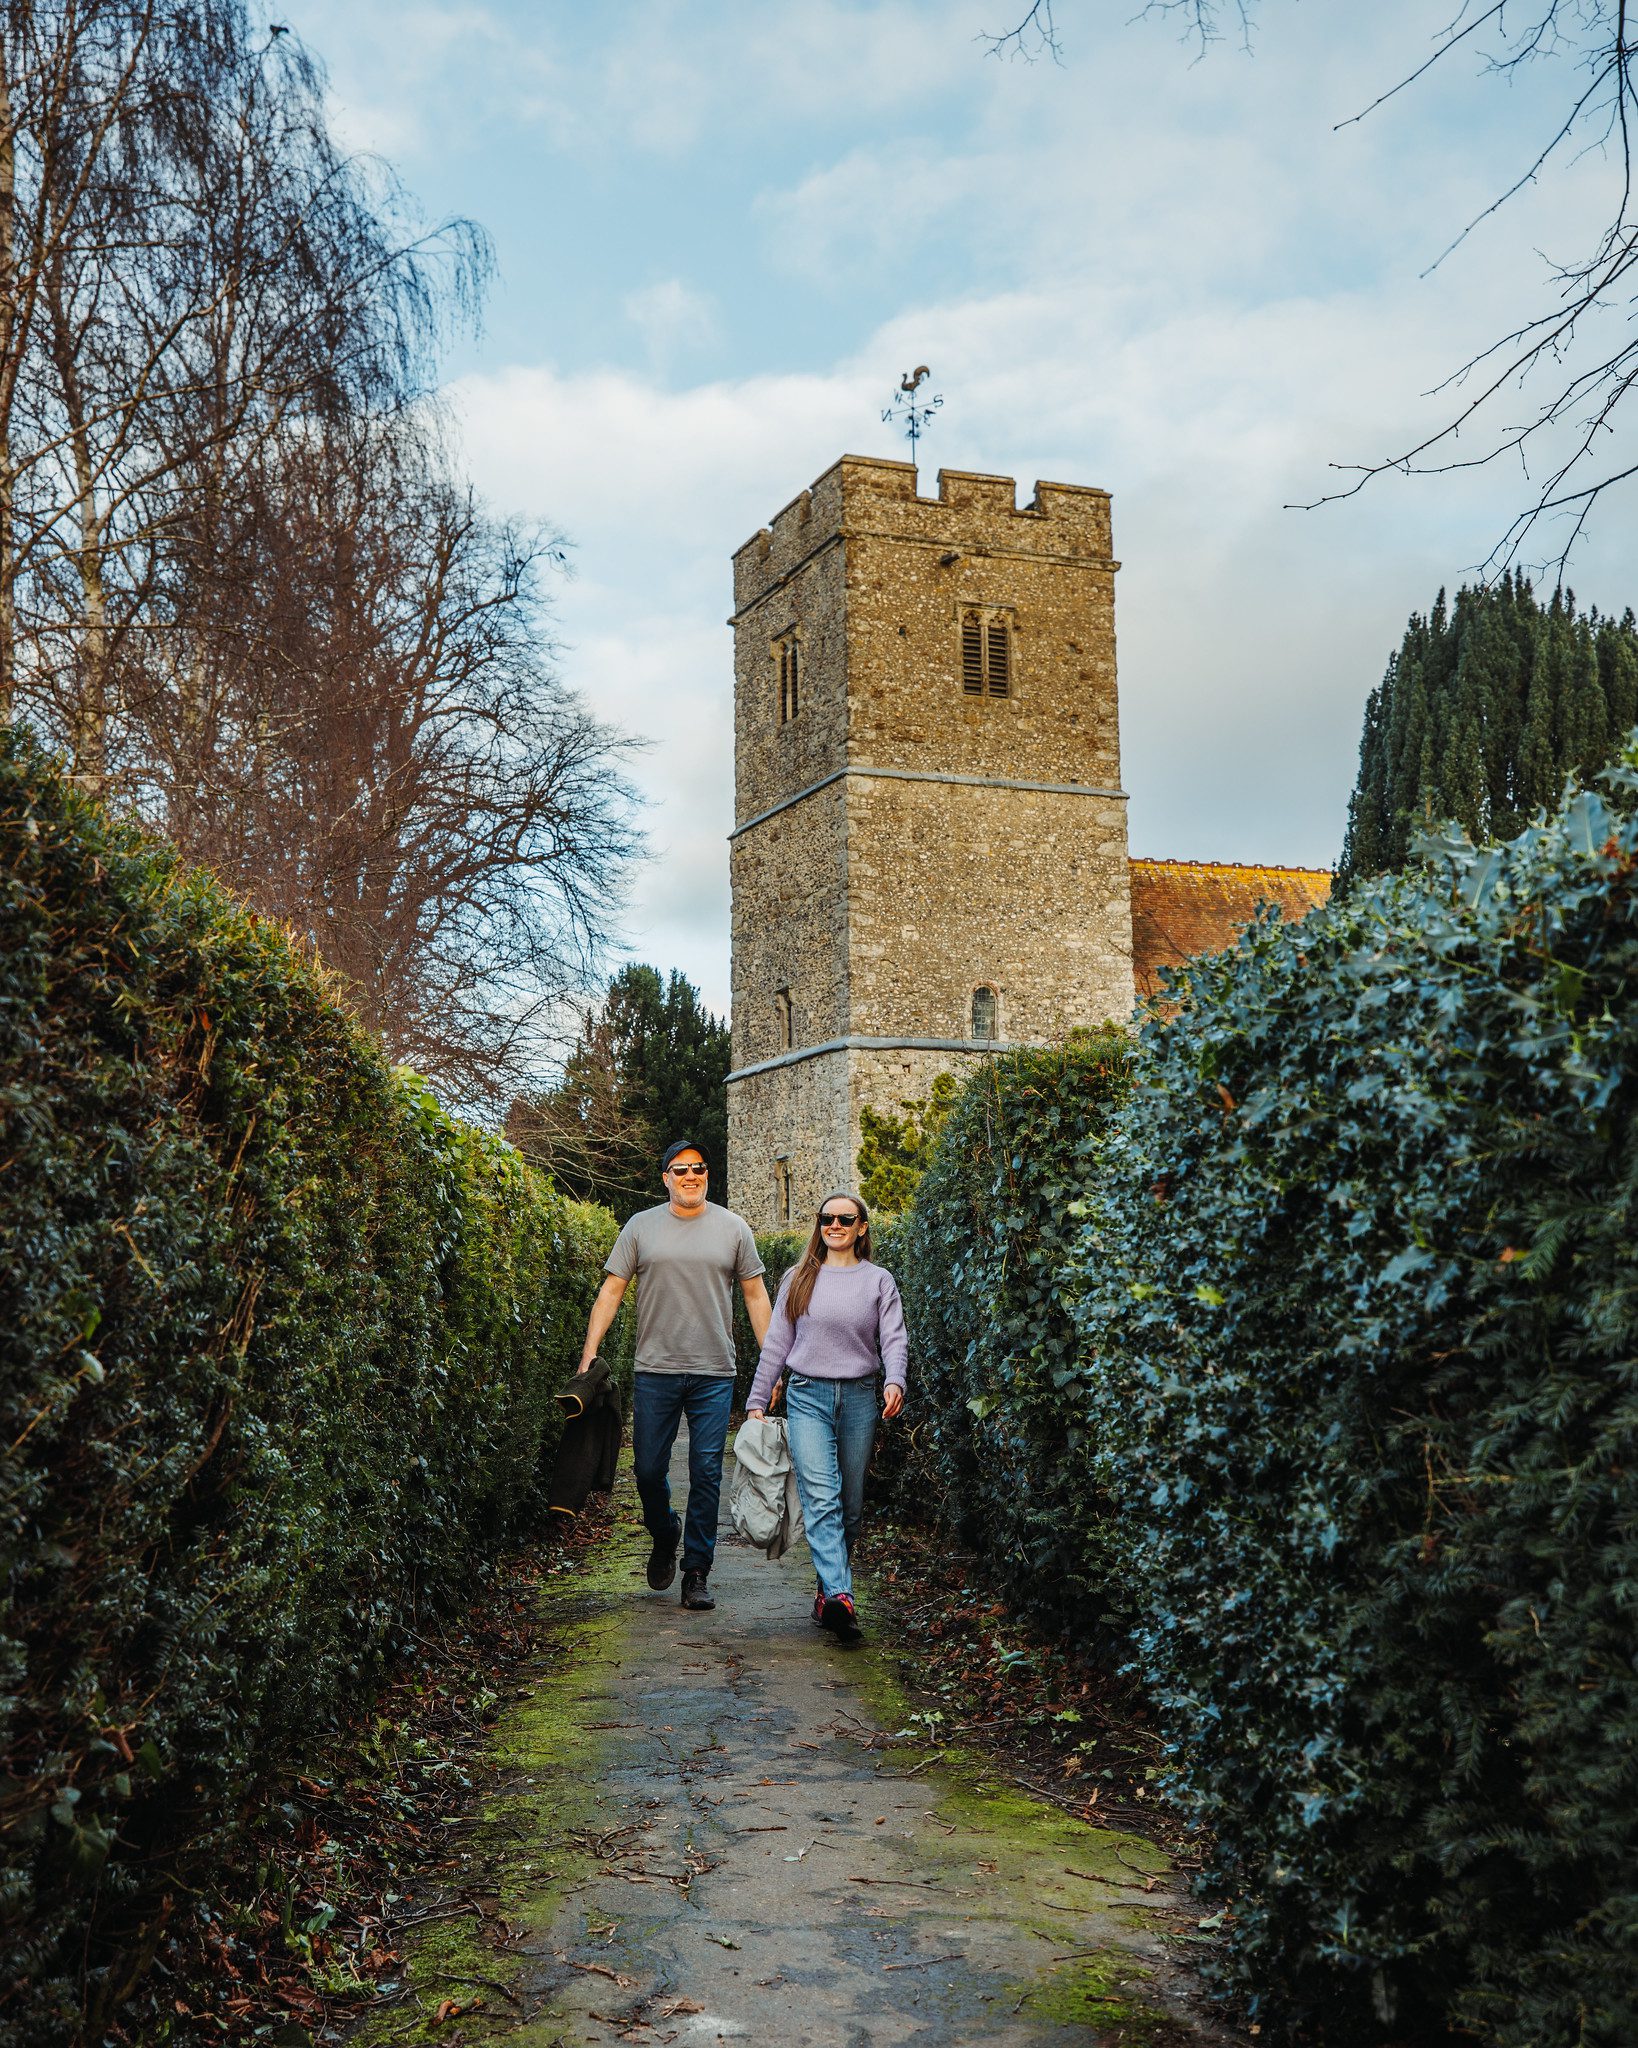 Couple walking in front of church tower